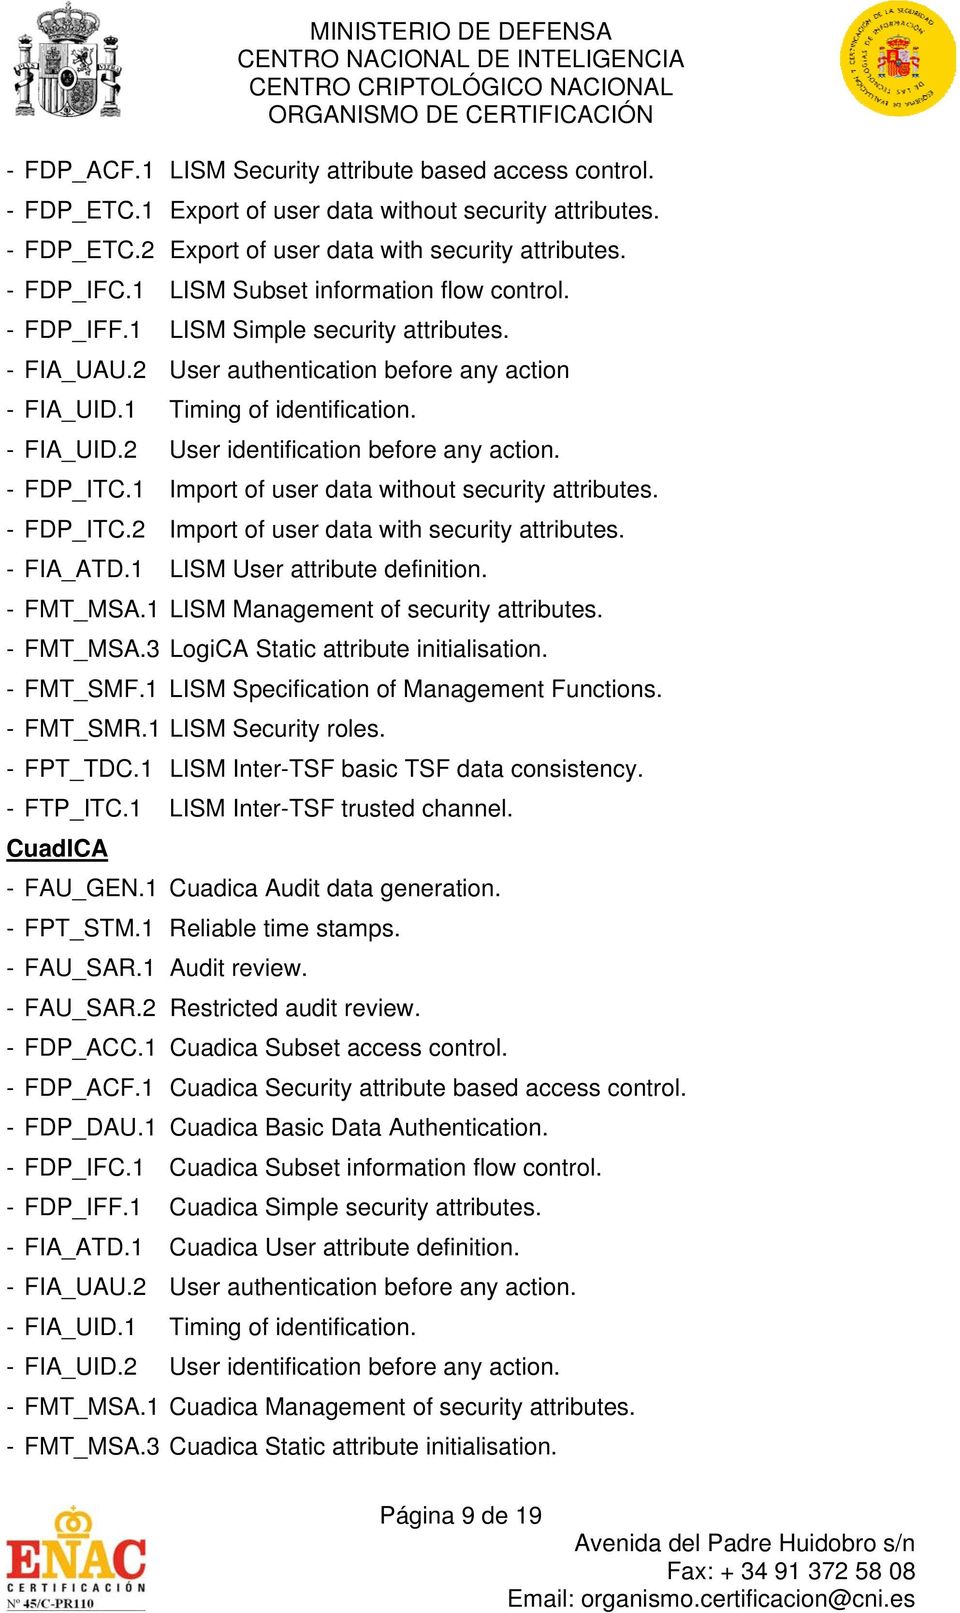 - FDP_ITC.2 Import of user data with security attributes. - FIA_ATD.1 LISM User attribute definition. - FMT_MSA.1 LISM Management of security attributes. - FMT_MSA.3 LogiCA Static attribute initialisation.